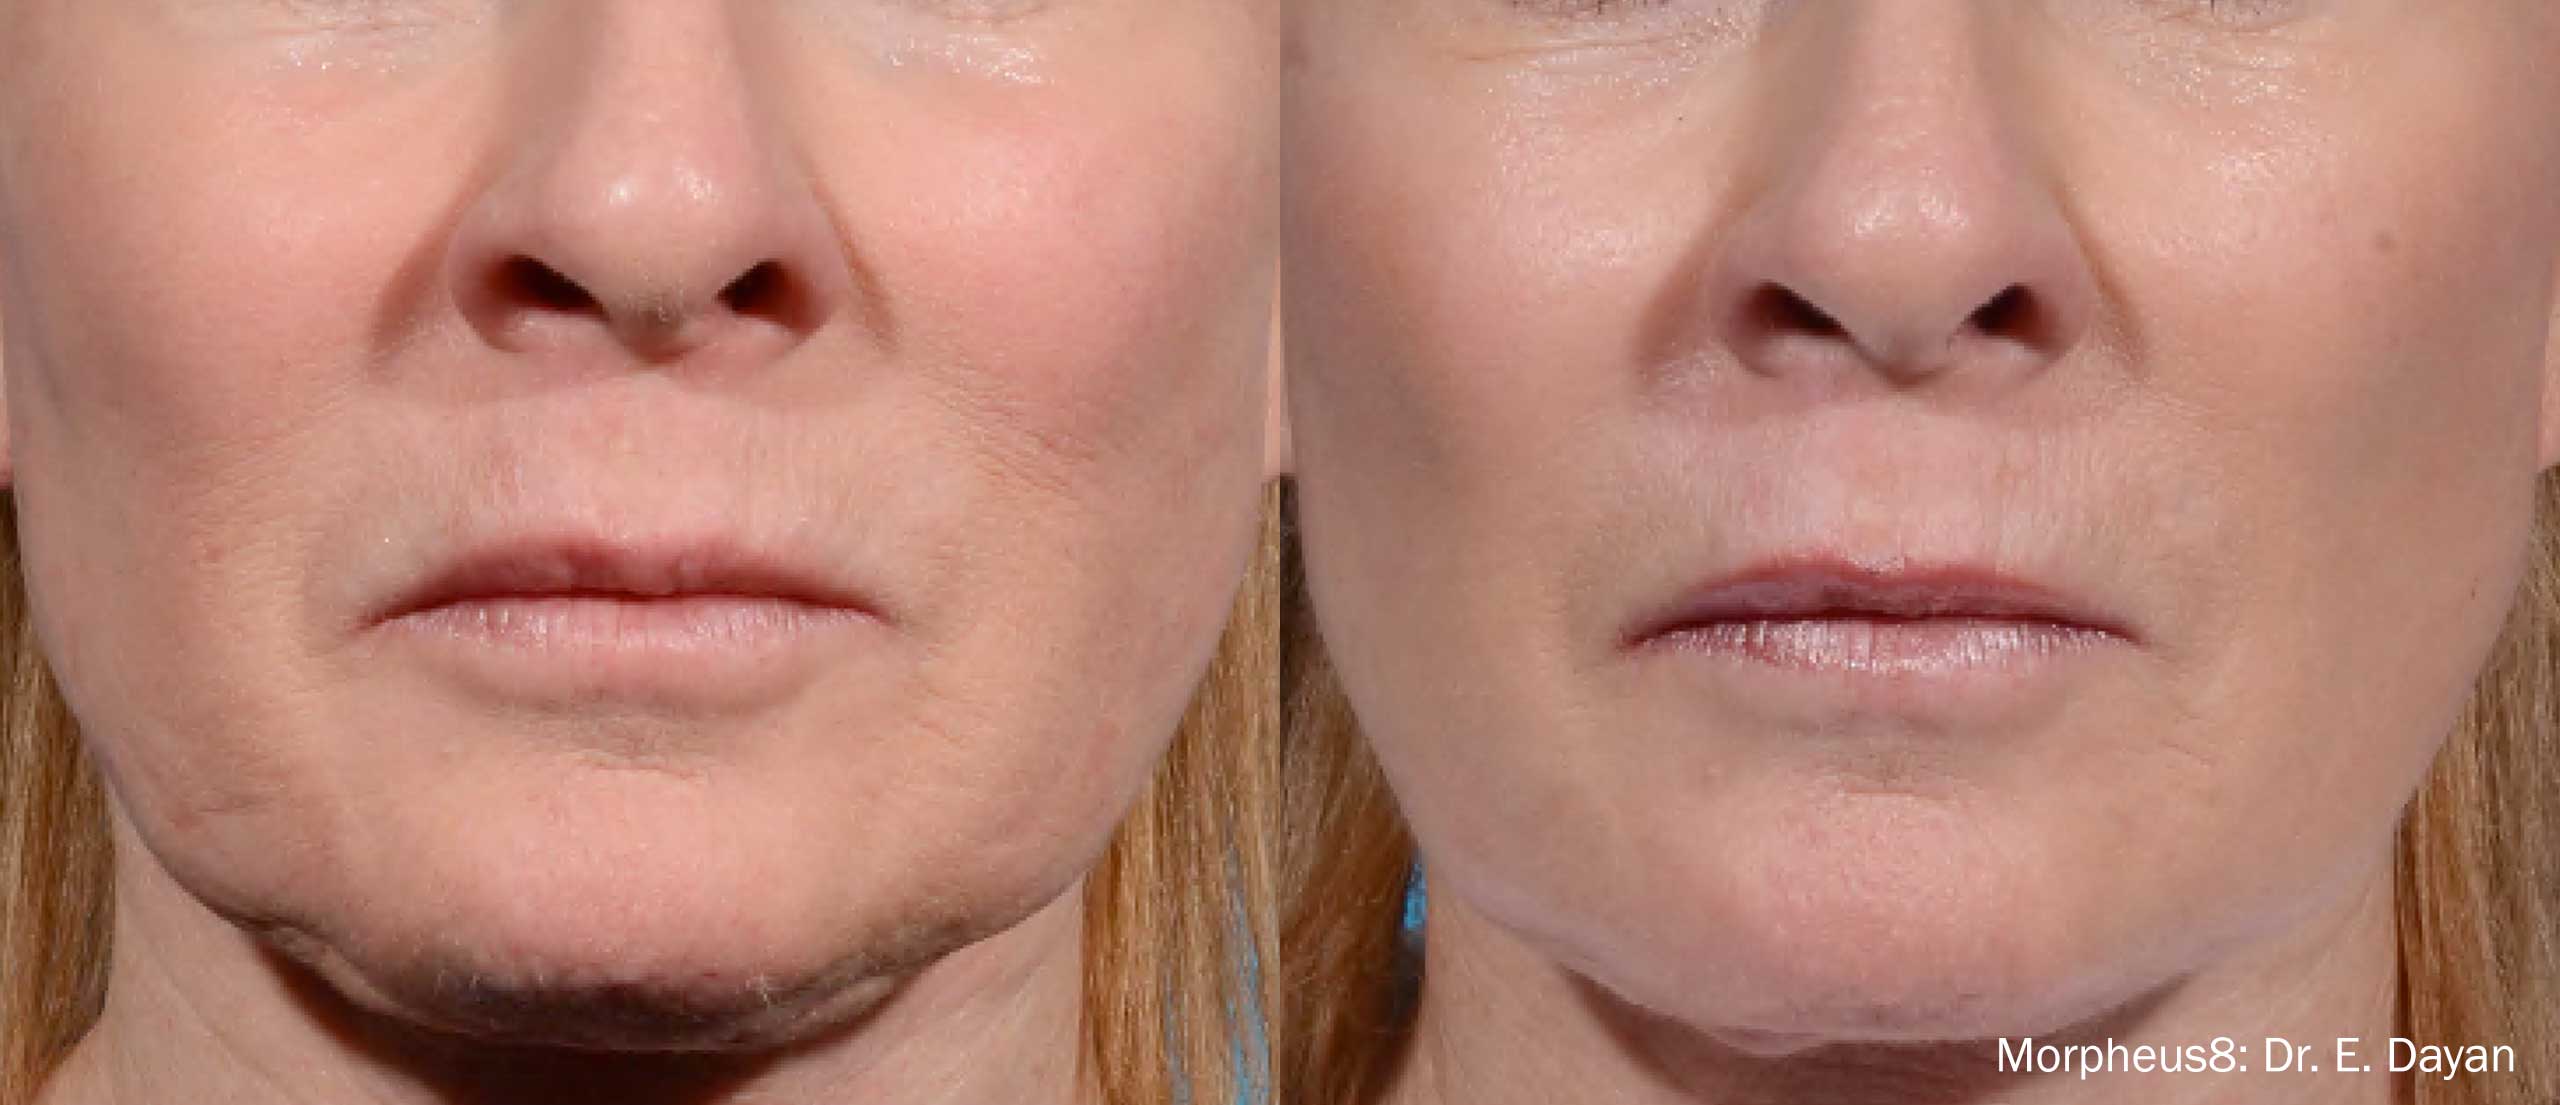 Woman's face shows tighter skin around the mouth after Morepheus 8 treatment.